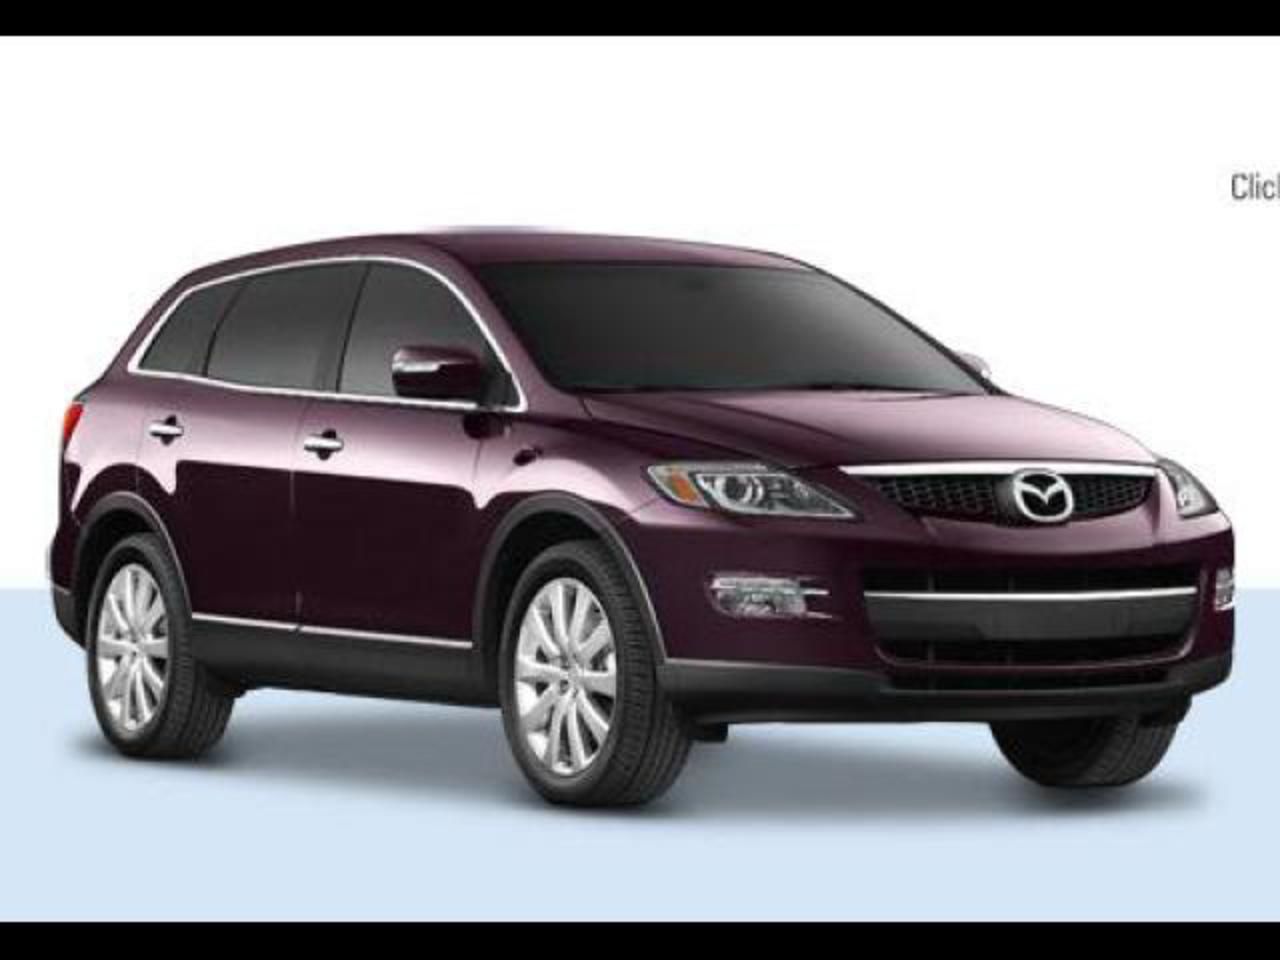 Mazda CX-9 GT 37. View Download Wallpaper. 640x480. Comments